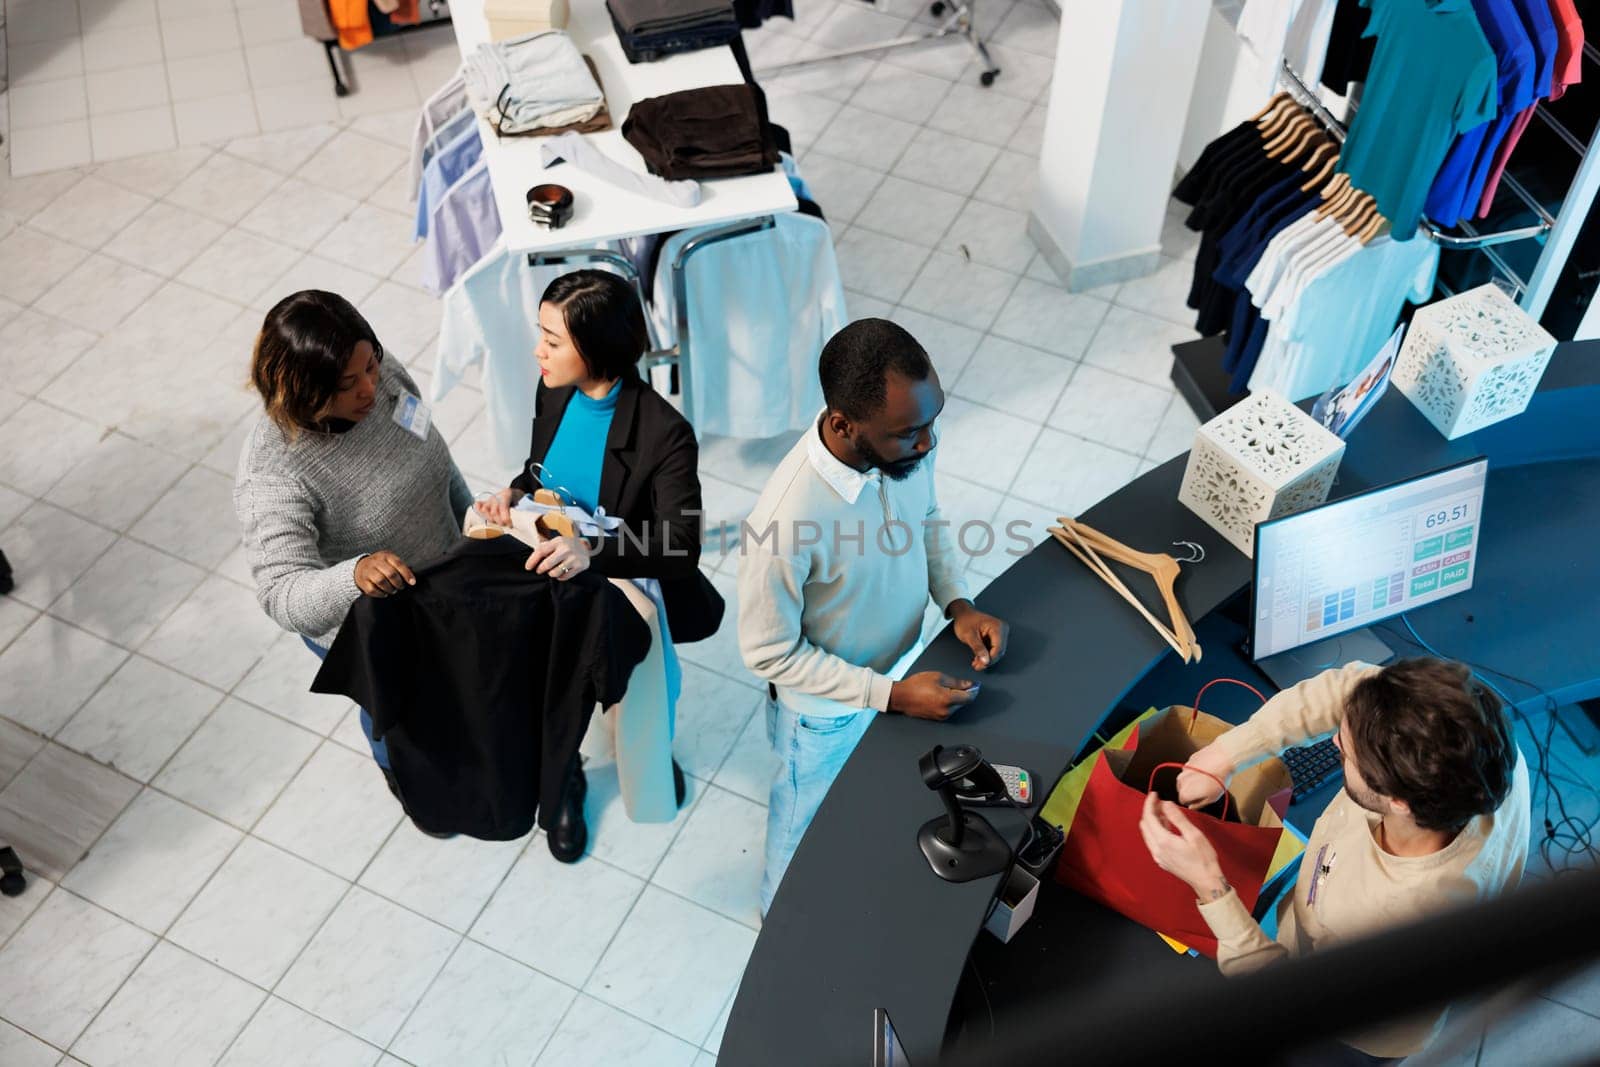 Customers waiting at checkout desk by DCStudio